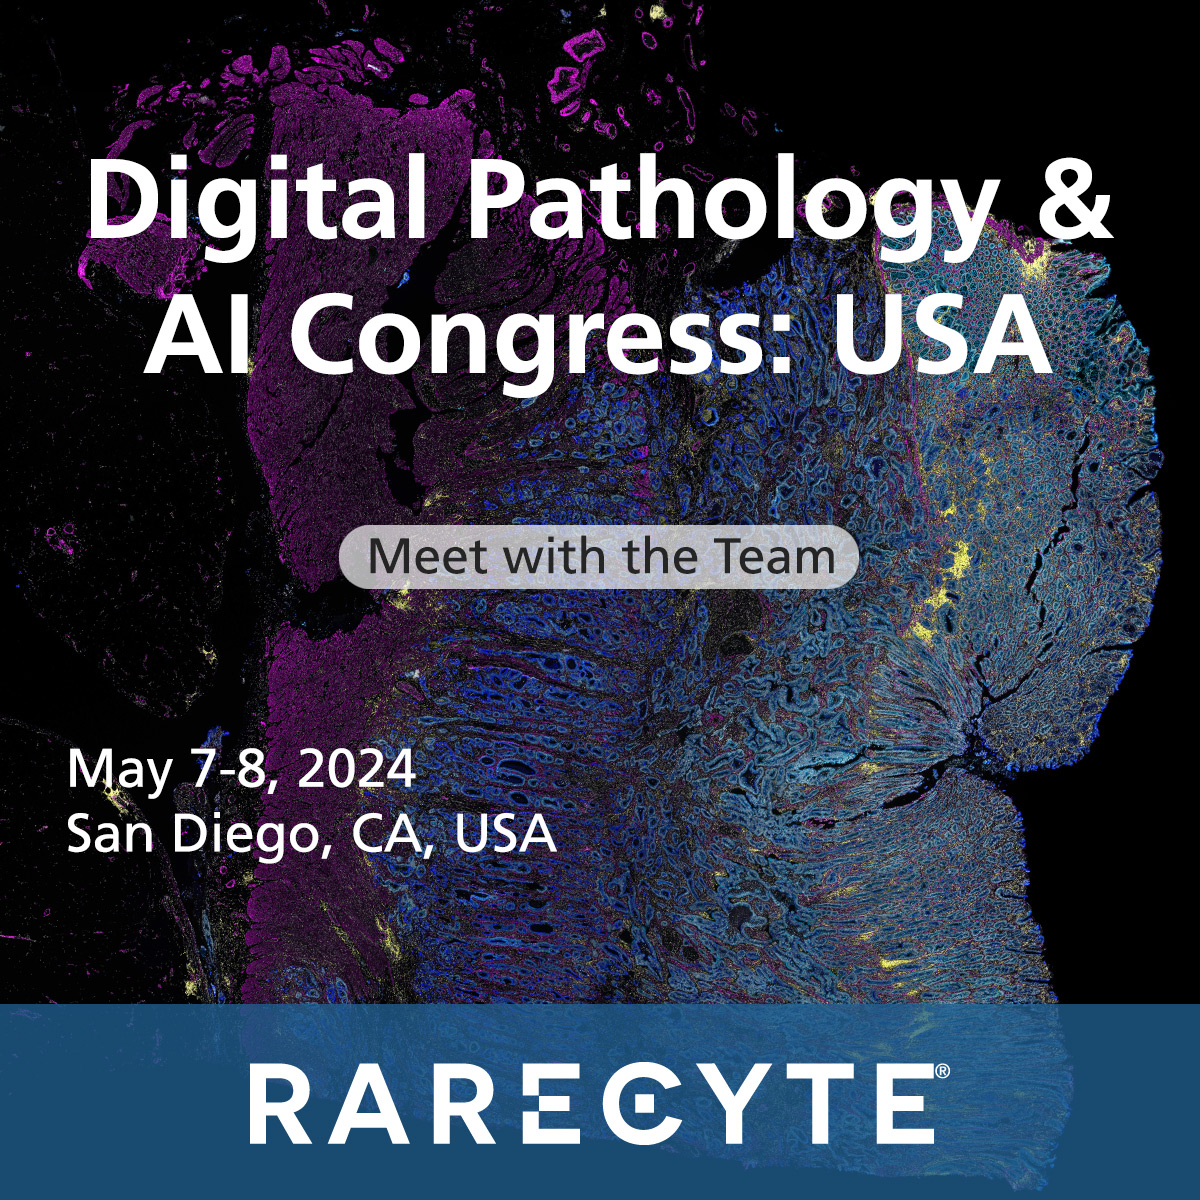 We're delighted to be attending the Digital Pathology & AI Congress in San Diego this week! Meet with our team to discuss what's new in spatial biology, rarecyte.com/contact-us/?ut….

#DigiPathUSA #DigitalPathology #SpatialBiology #RareCyte